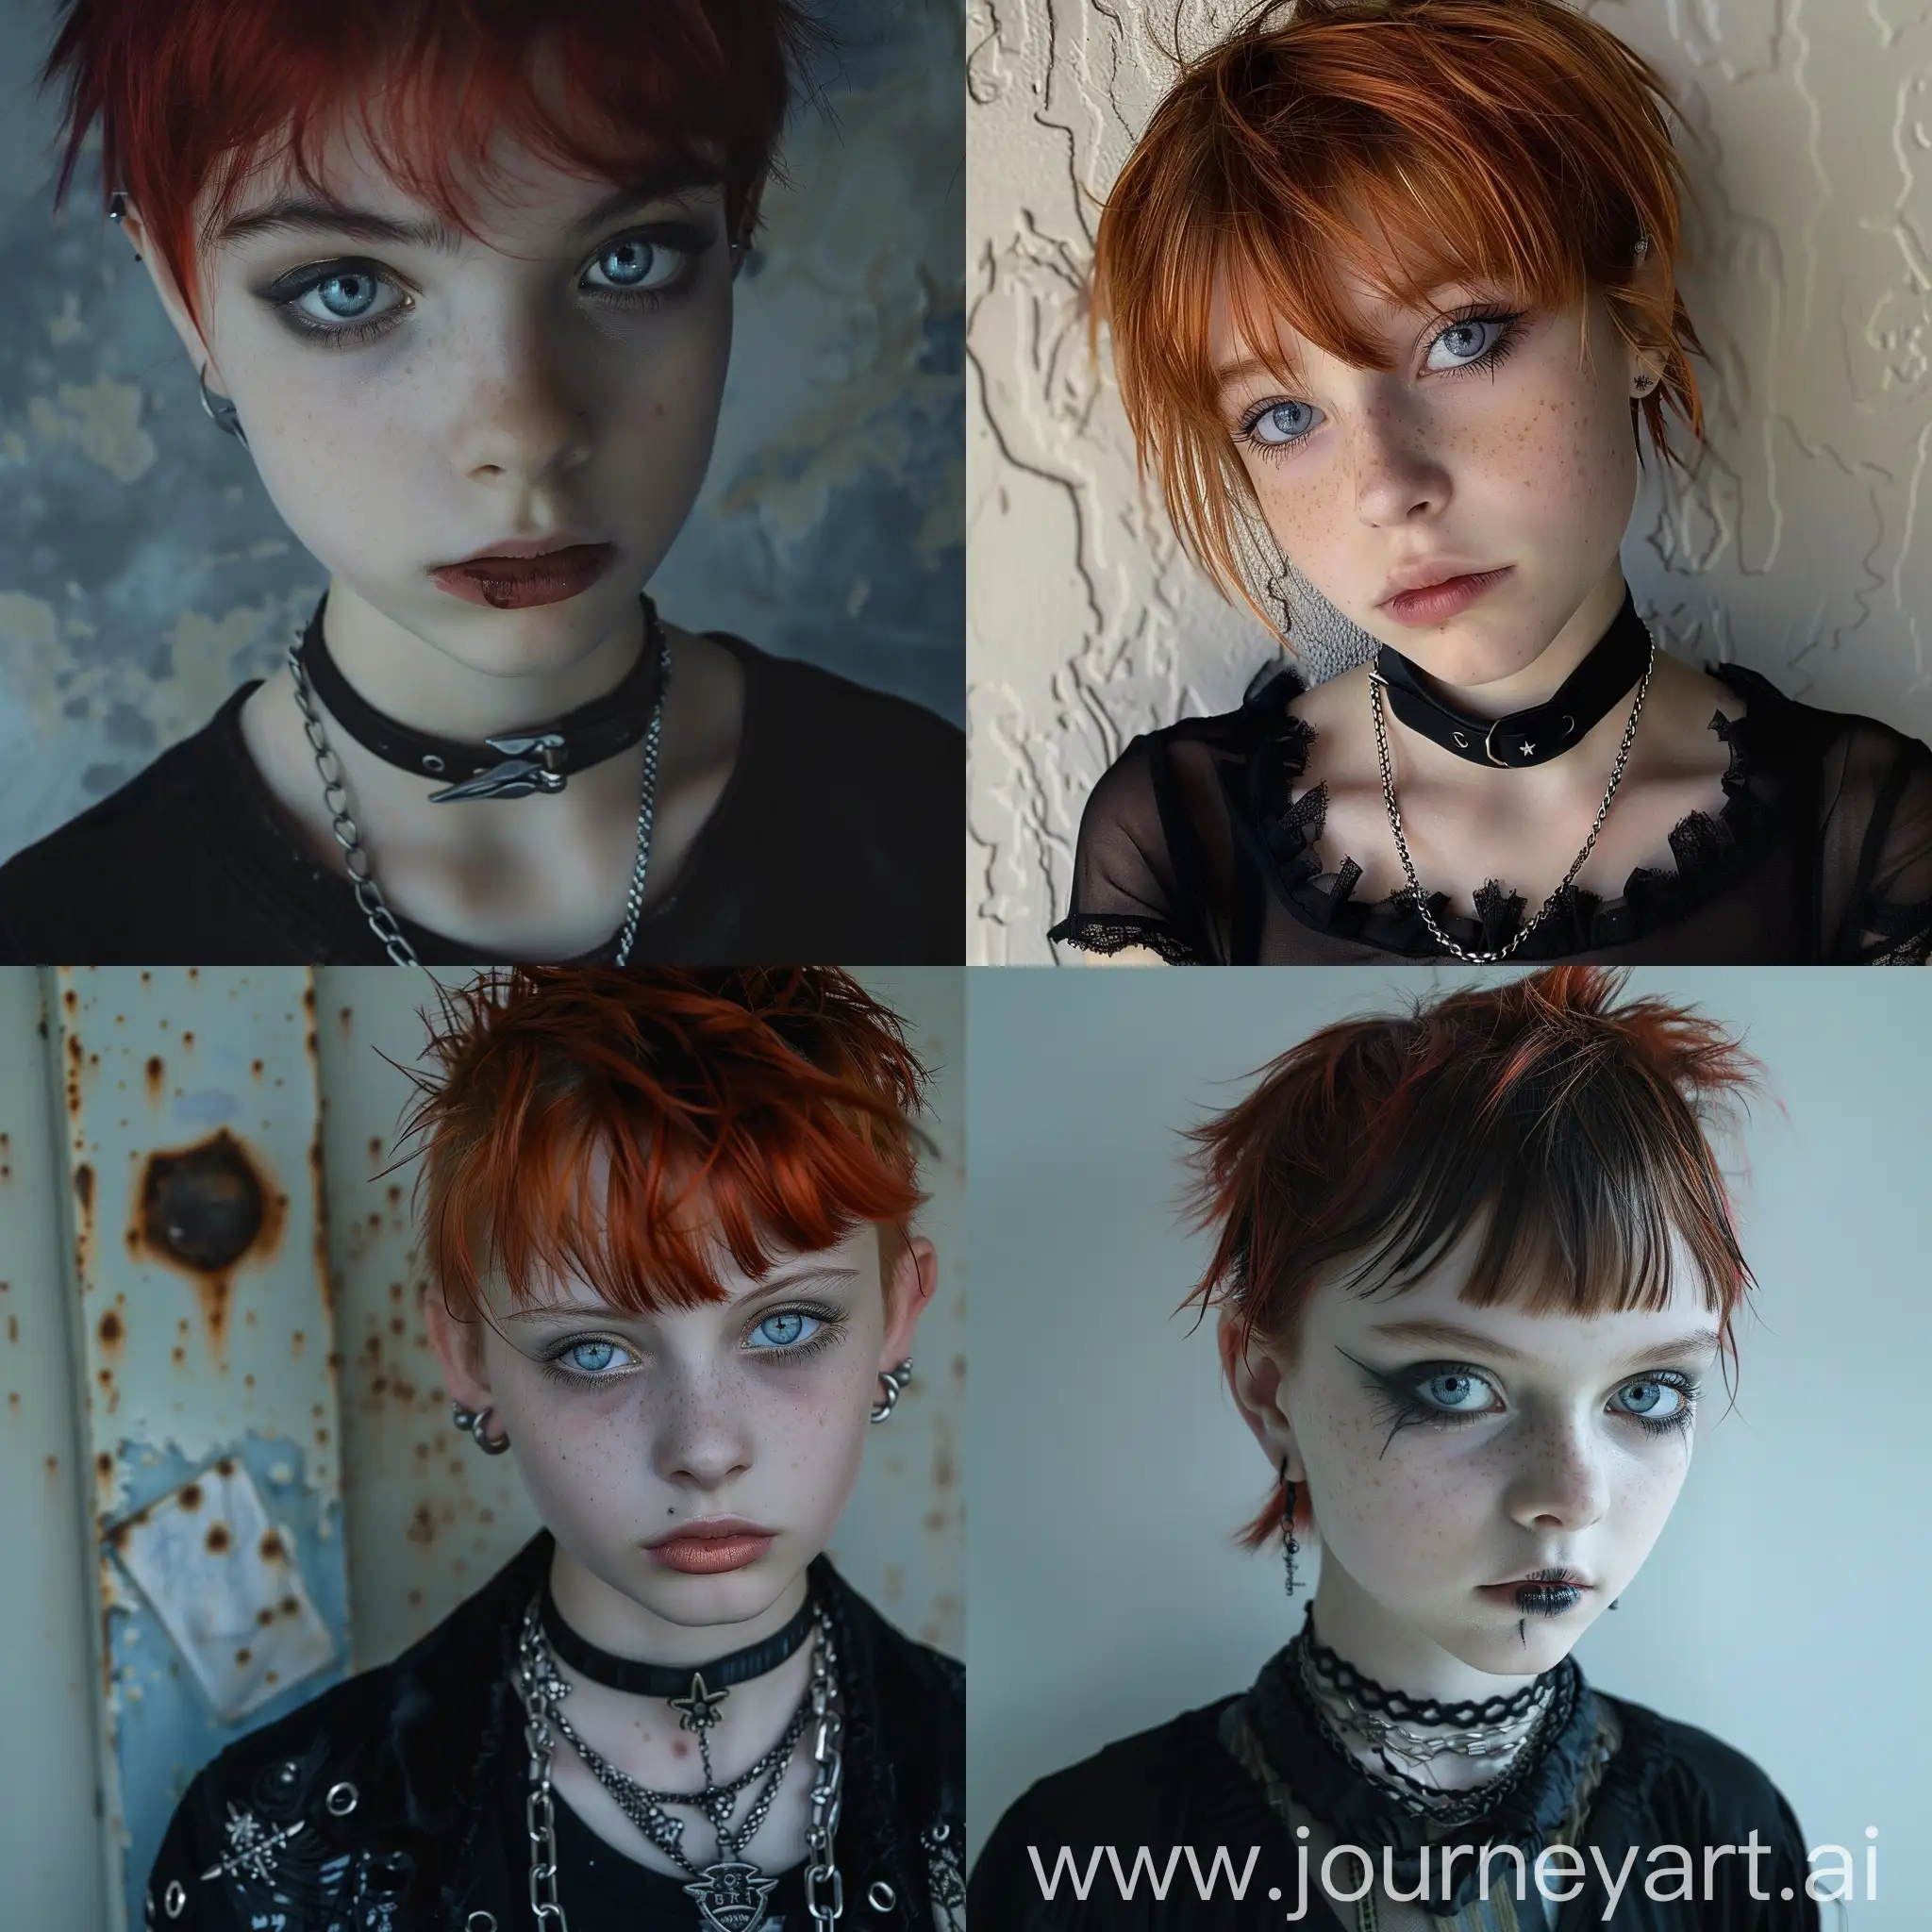 Goth-Teenage-Girl-with-Pixie-Cut-and-Red-Hair-Portrait